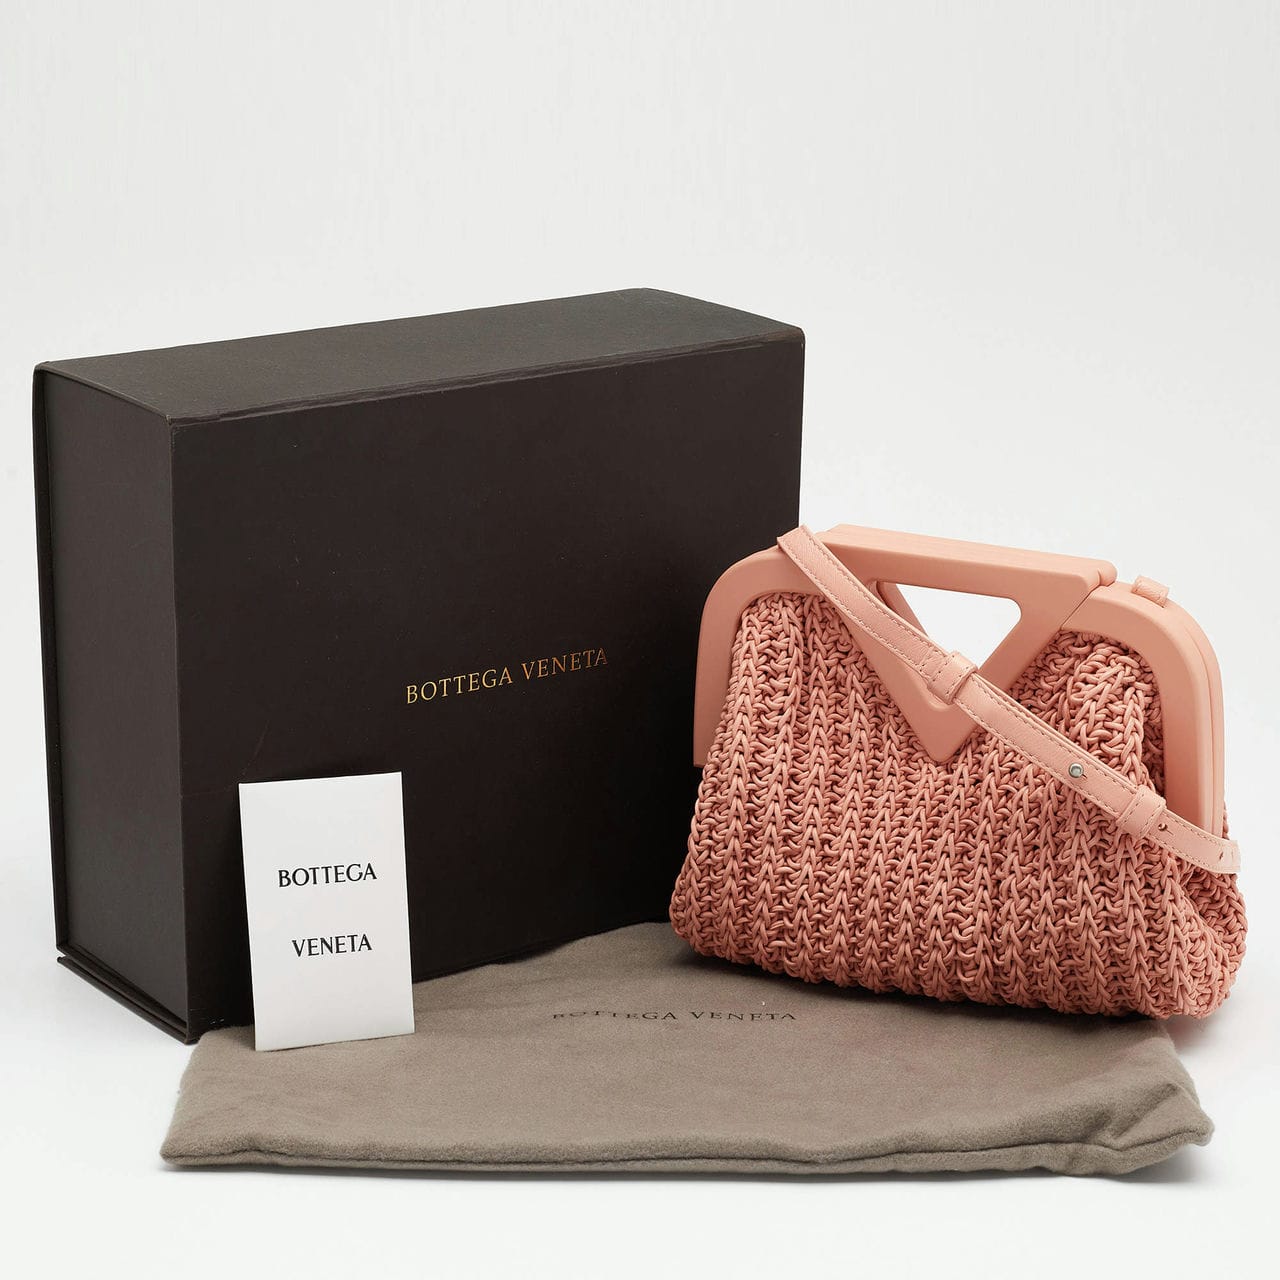 How To Know That Your Bottega Veneta Bag Is Authentic – HG Bags Online